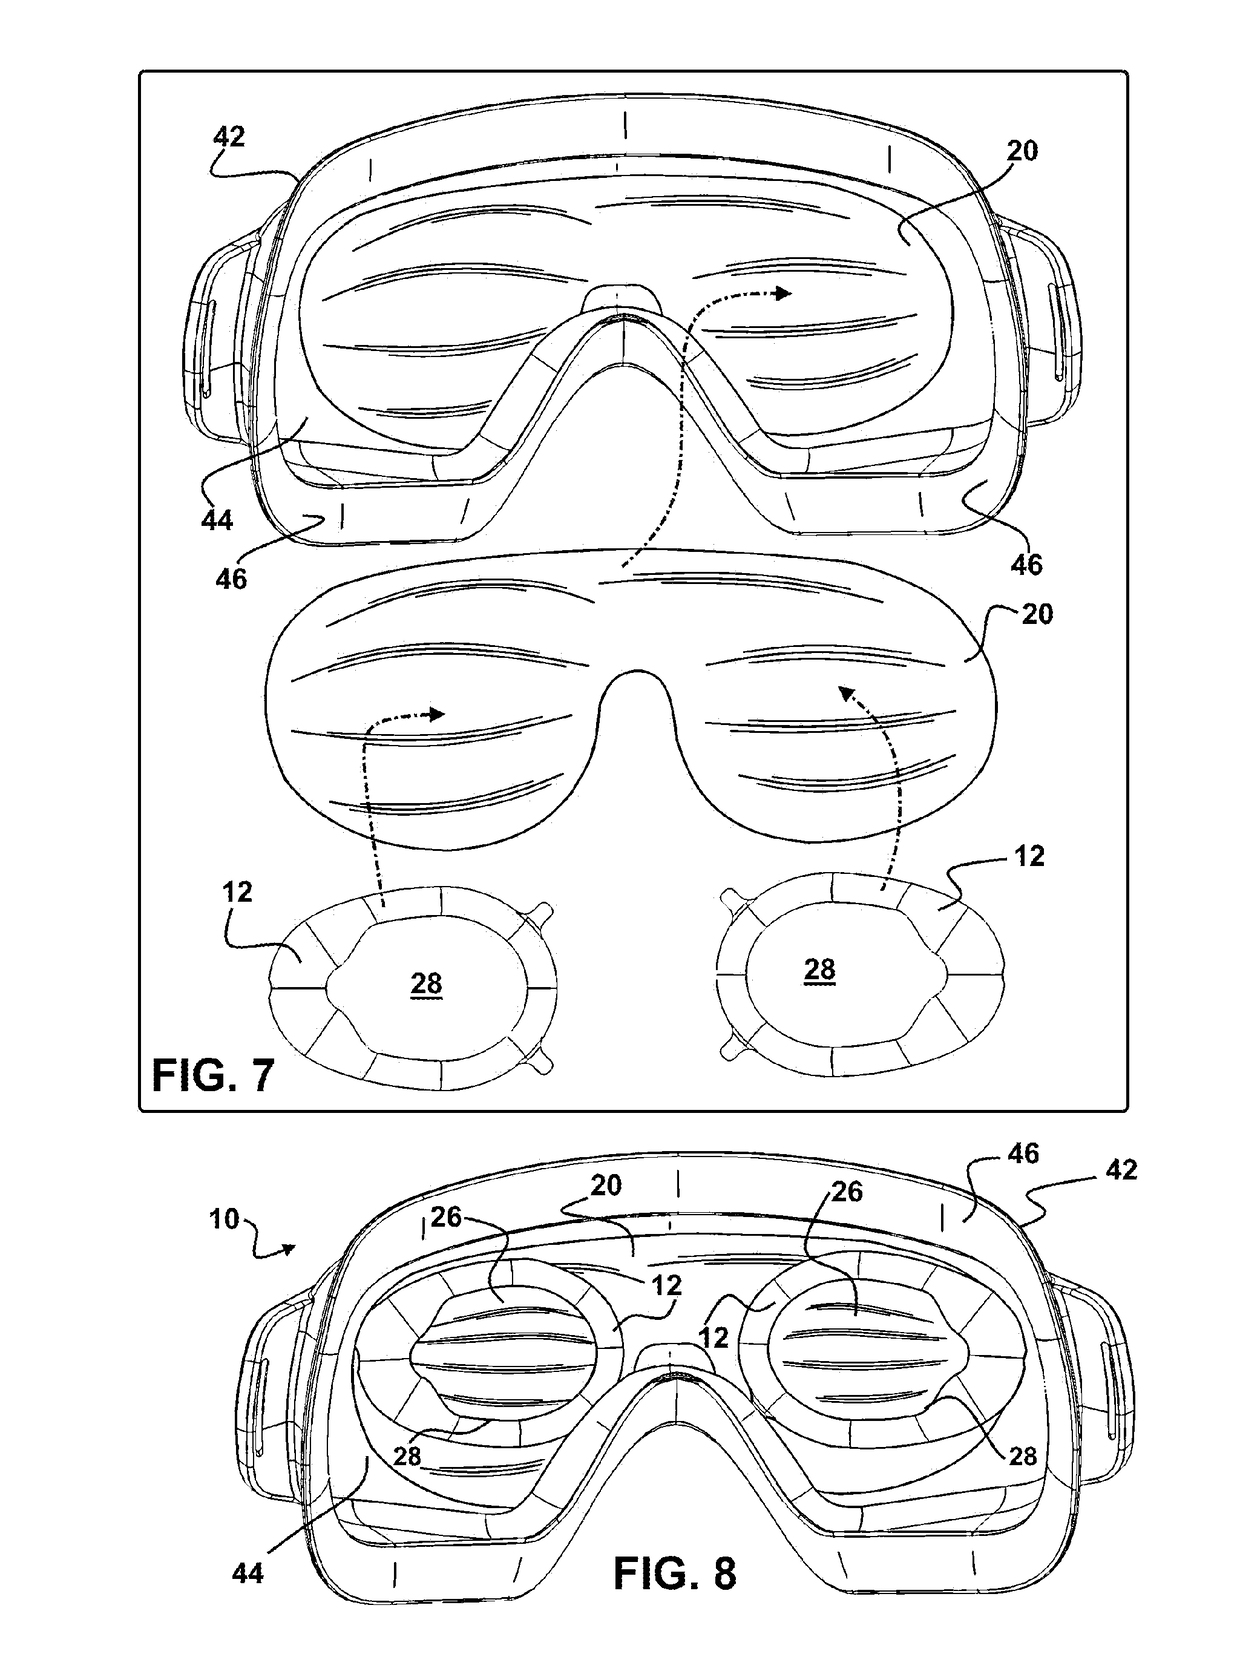 System for Treatment of Eye Conditions